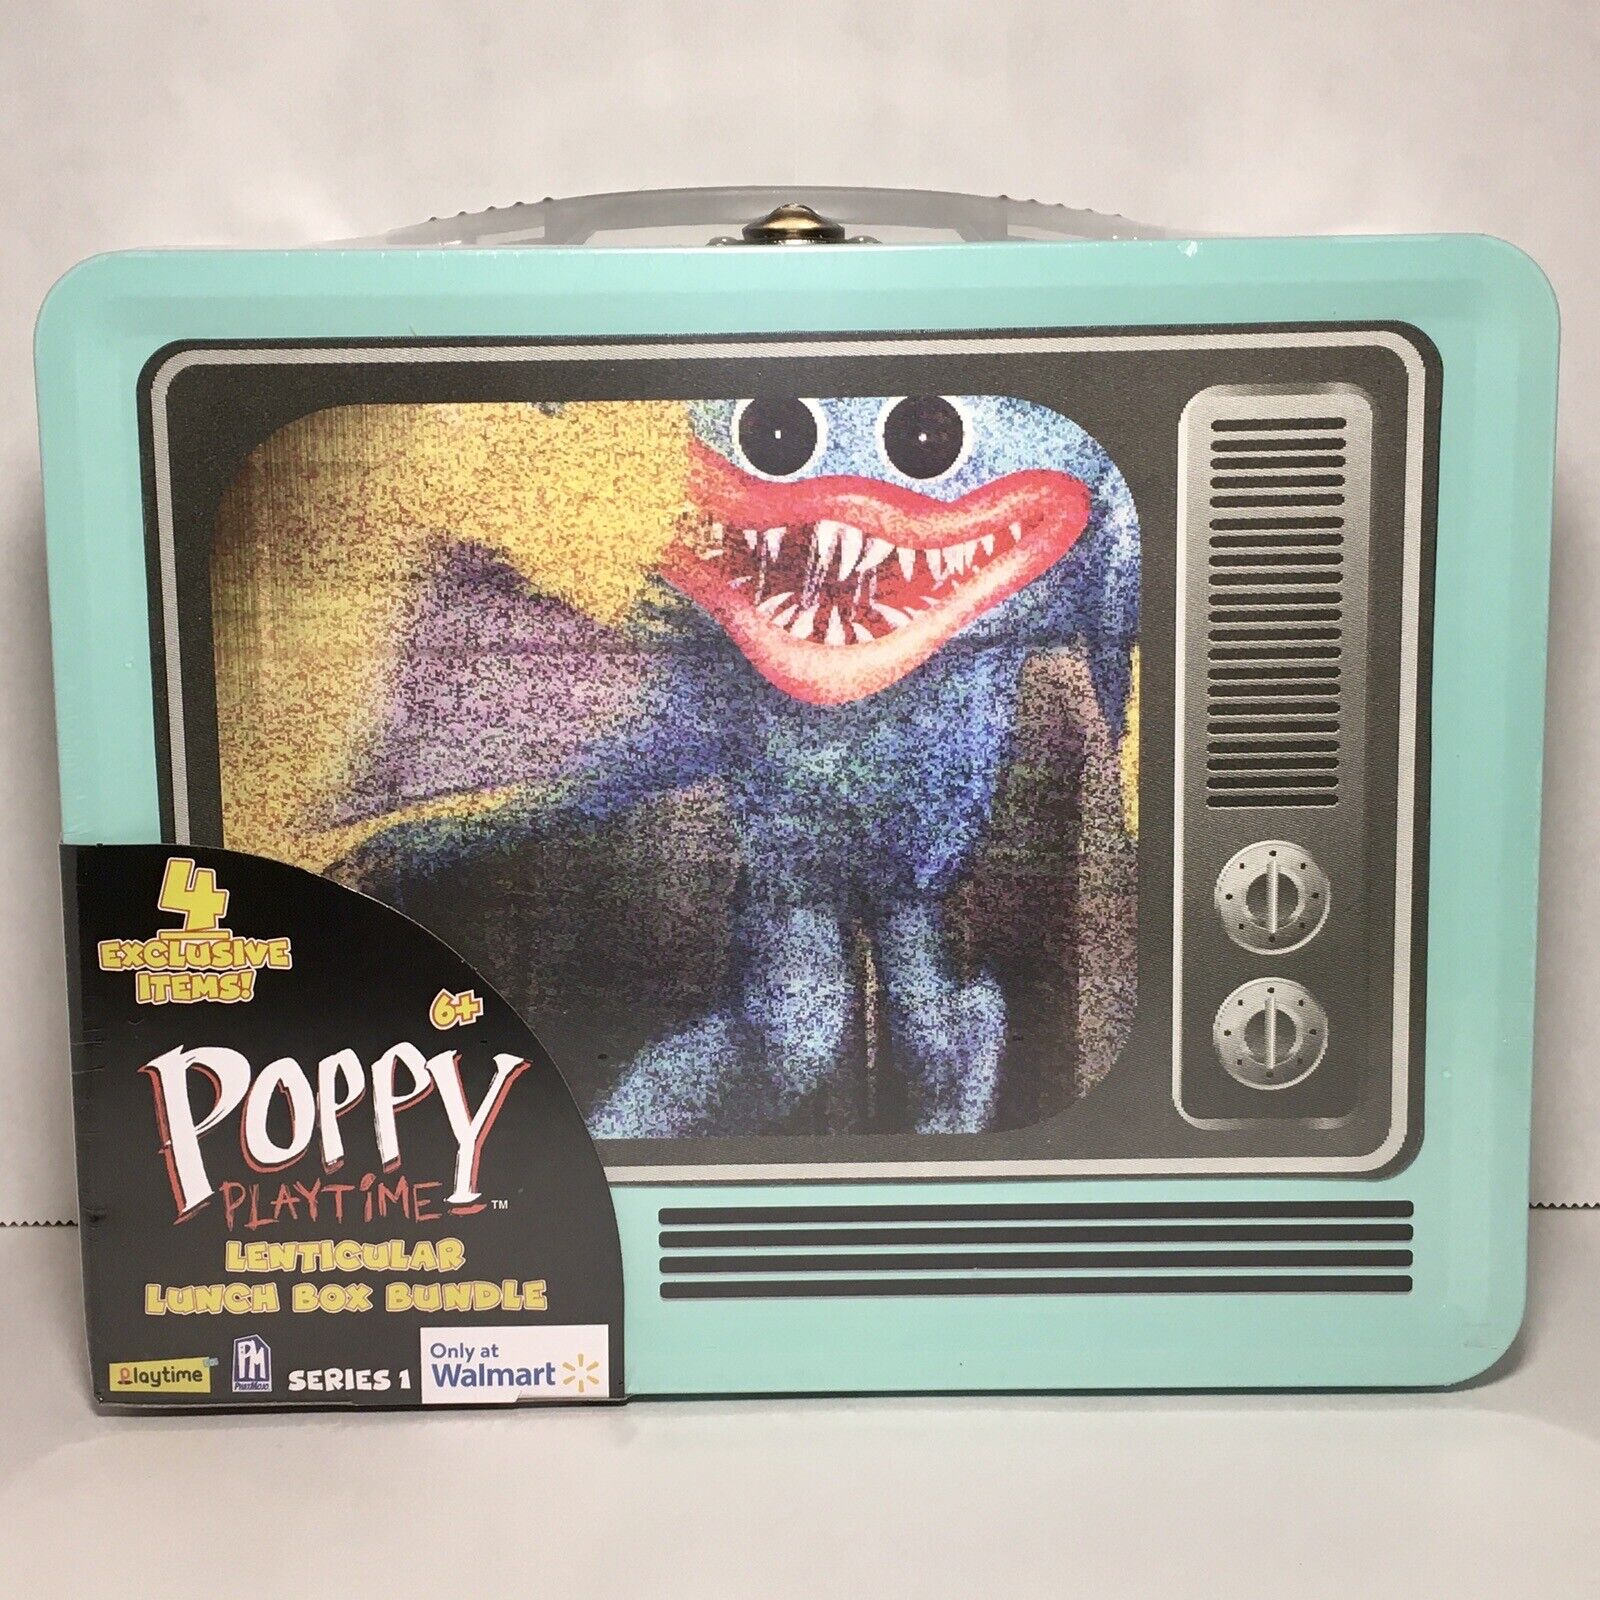 Poppy Playtime Lenticular Lunch Box Bundle Series 1 (4 Exclusive Items)